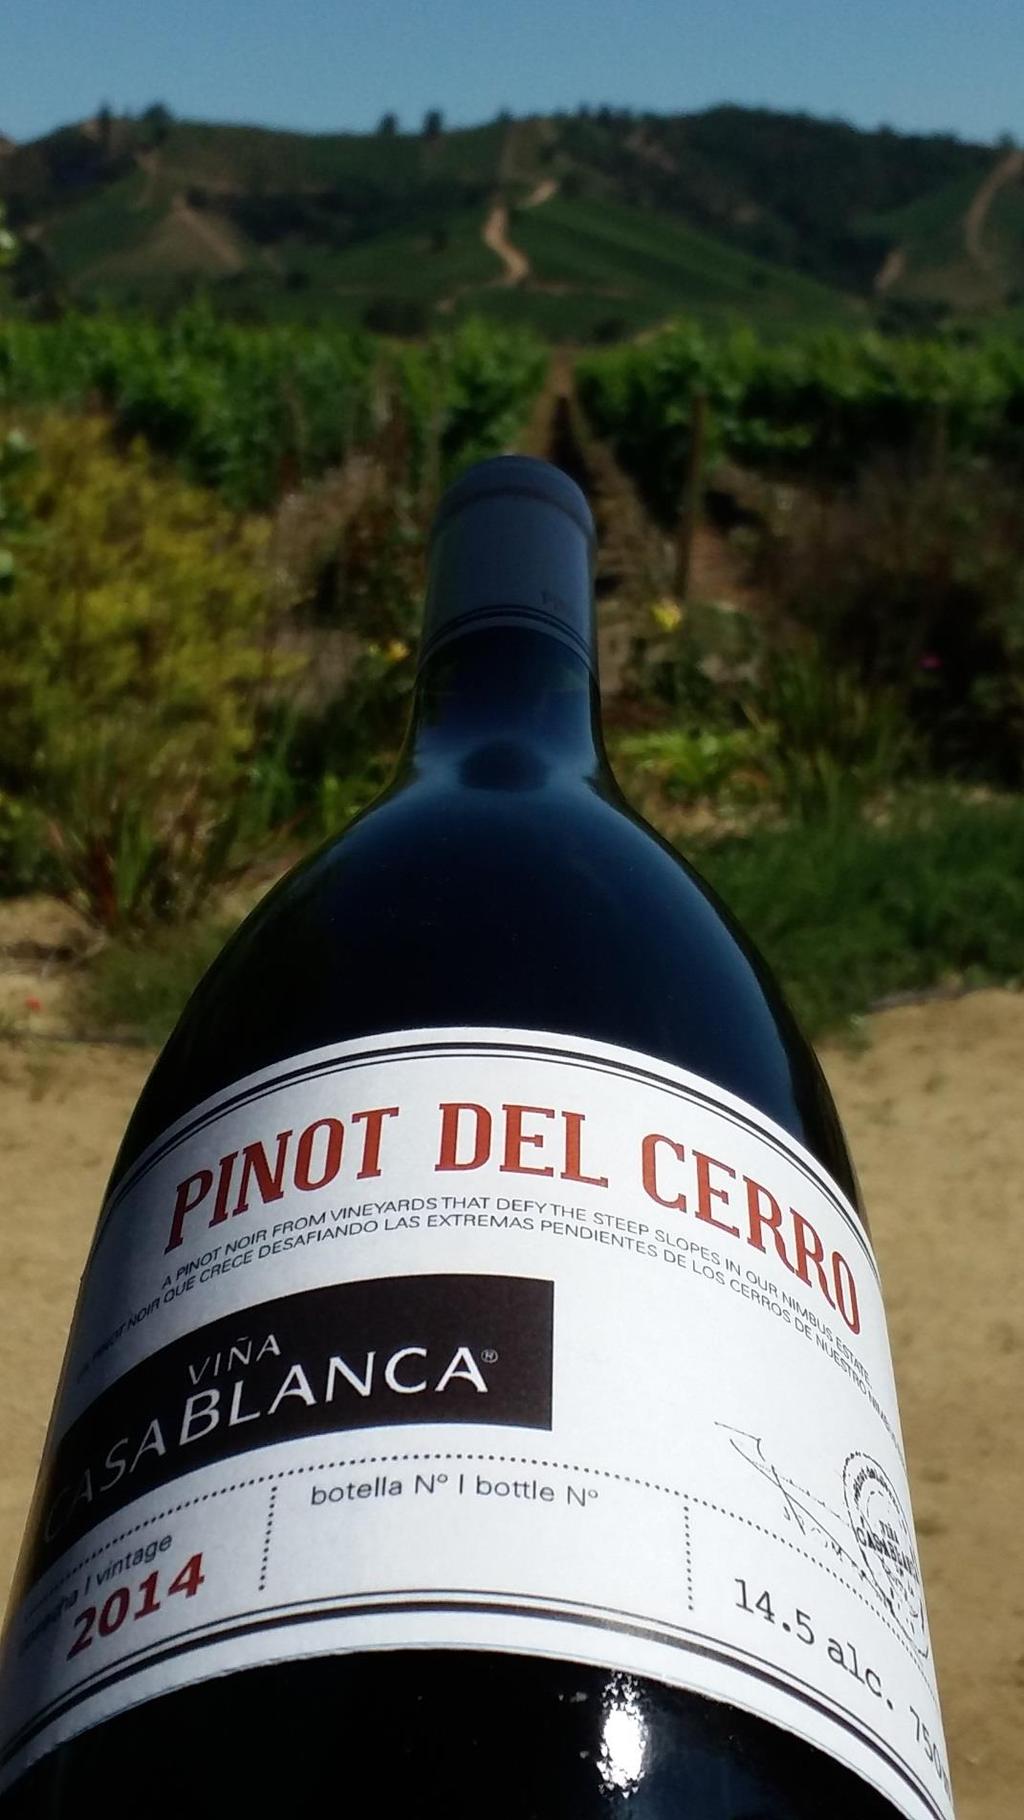 A Pinot Noir from vineyards that defy the steep slopes in our Nimbus Estate Pinot del Cerro is a limited edition. It s first vintage 2014 is a collection of just 1300 bottles.